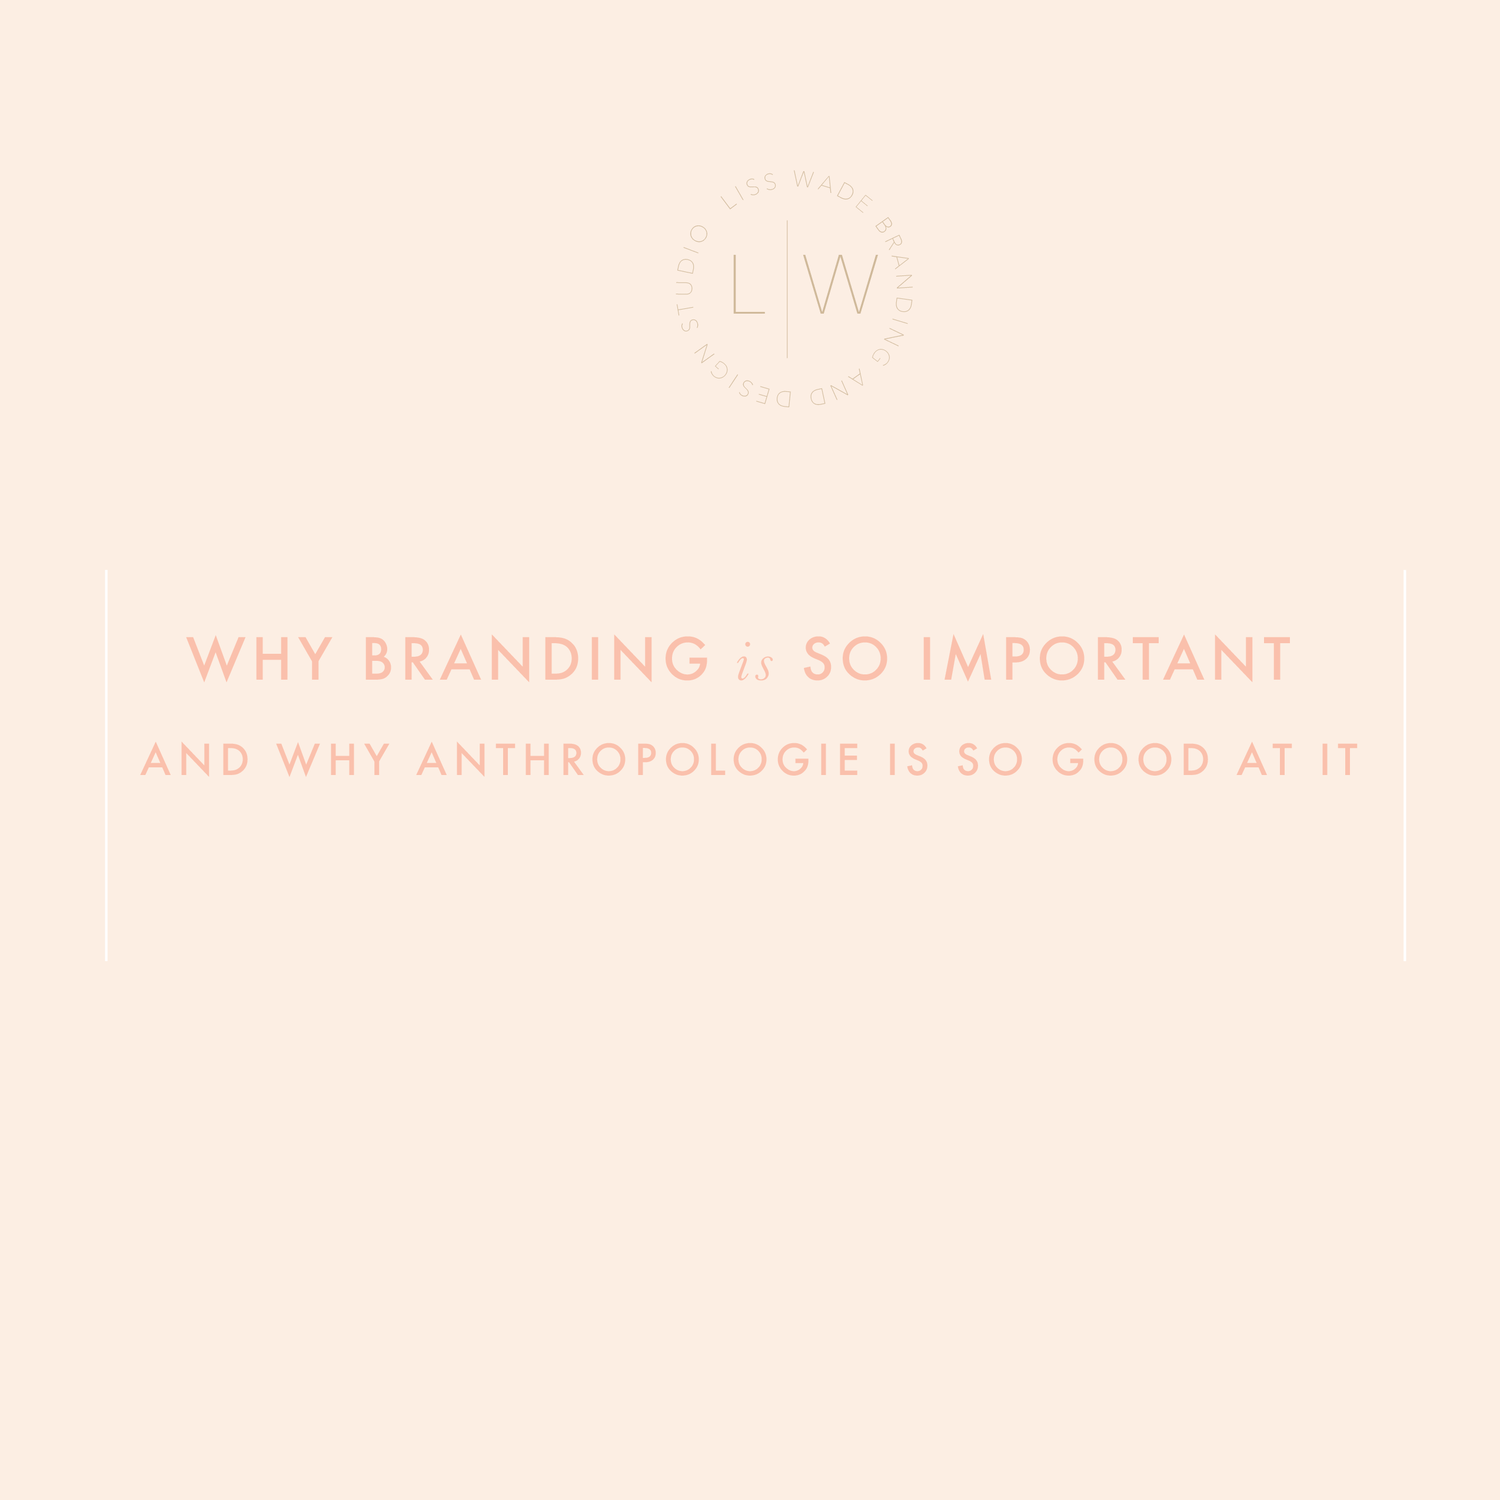 Antropologie Logo - Why branding is so important and why Anthropologie is so good at it ...